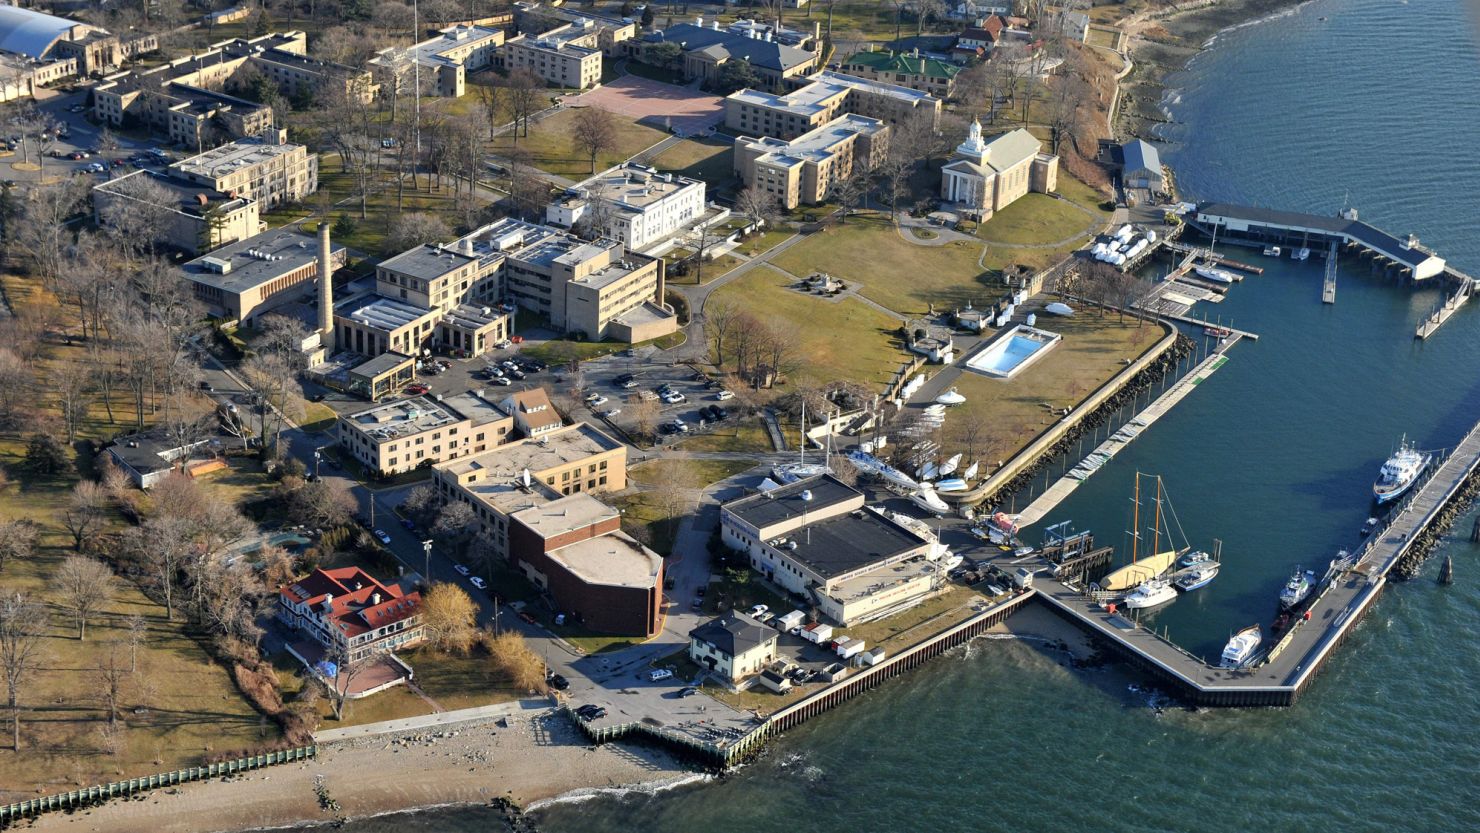 The United States Merchant Marine Academy in Kings Point, New York, halted its "Sea Year" training program last month after a student said she was raped.